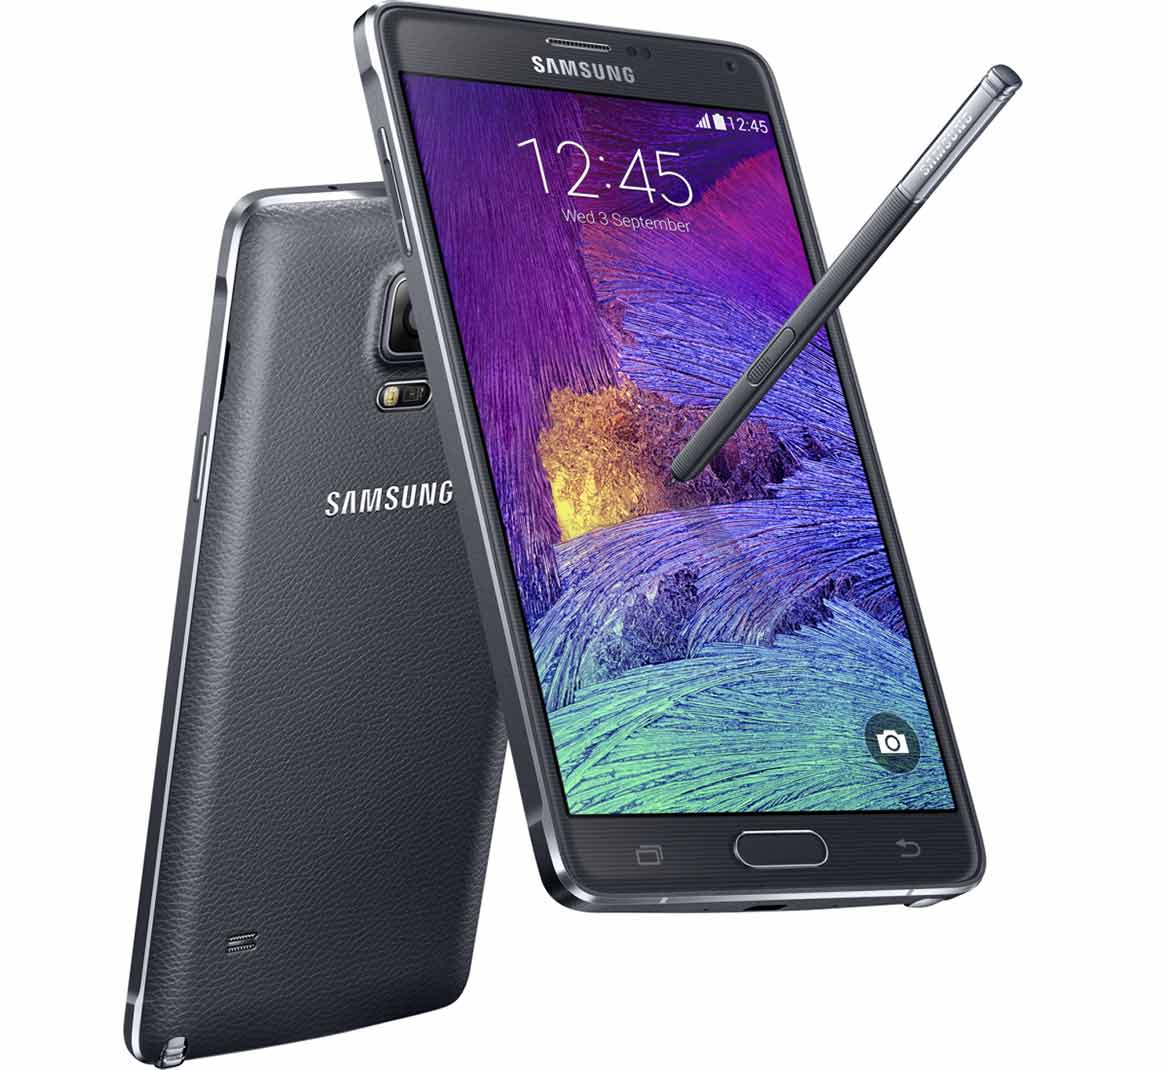 Samsung Galaxy Note 4 (N910G) - Very Good Condition